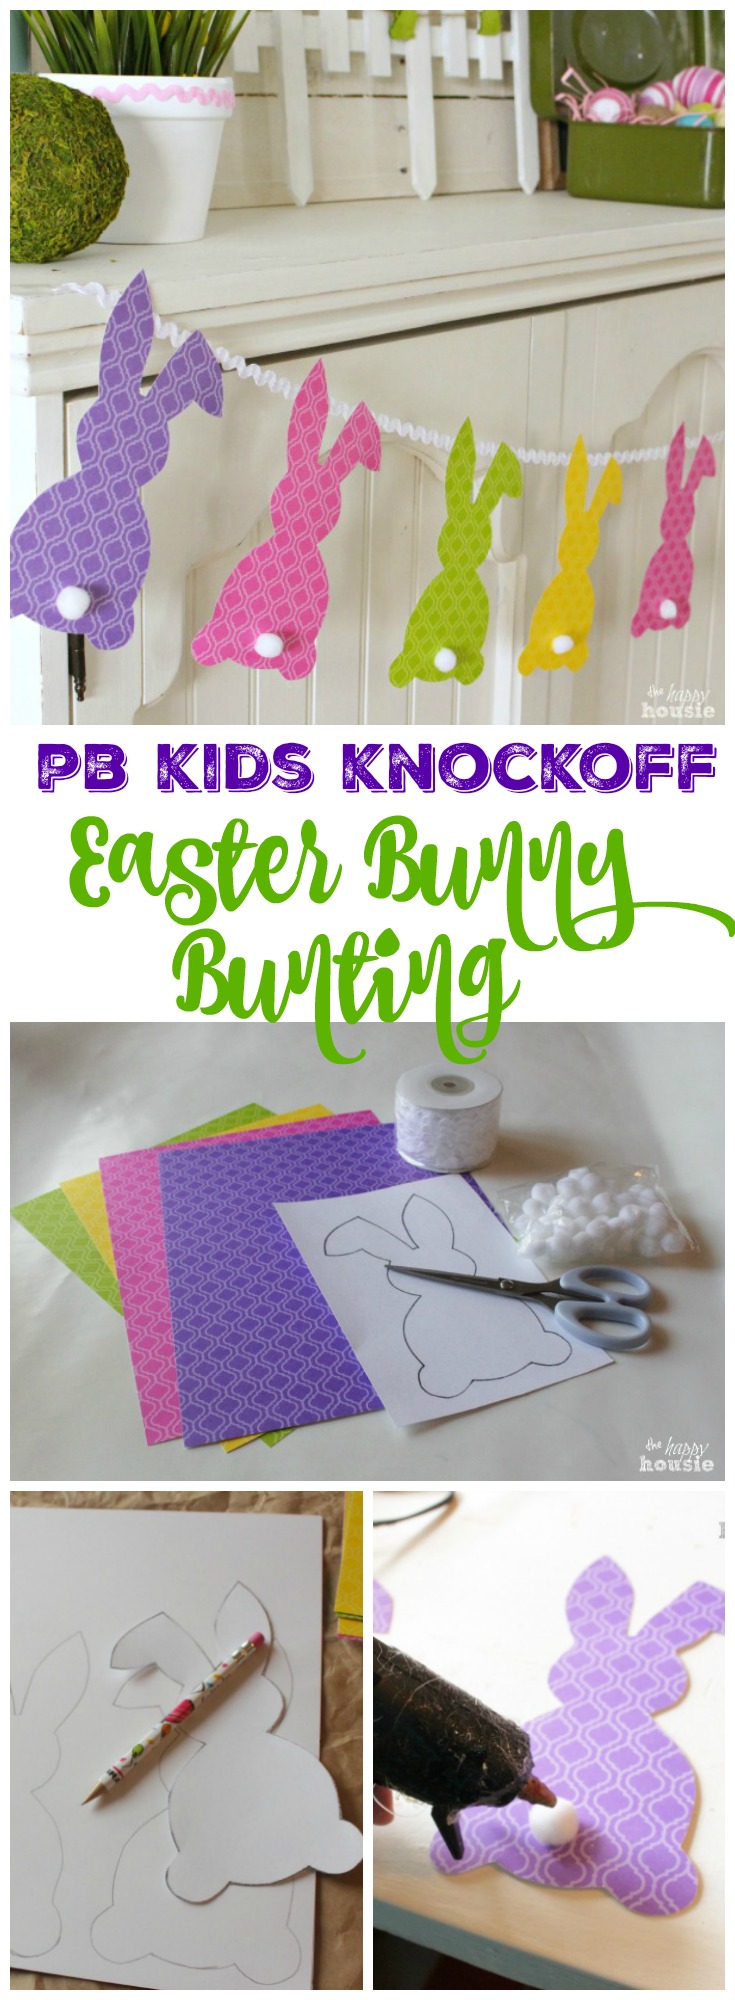 Make your own quick easy and adorable PB Kids Knockoff Easter Bunny Bunting tutorial at the happy housie